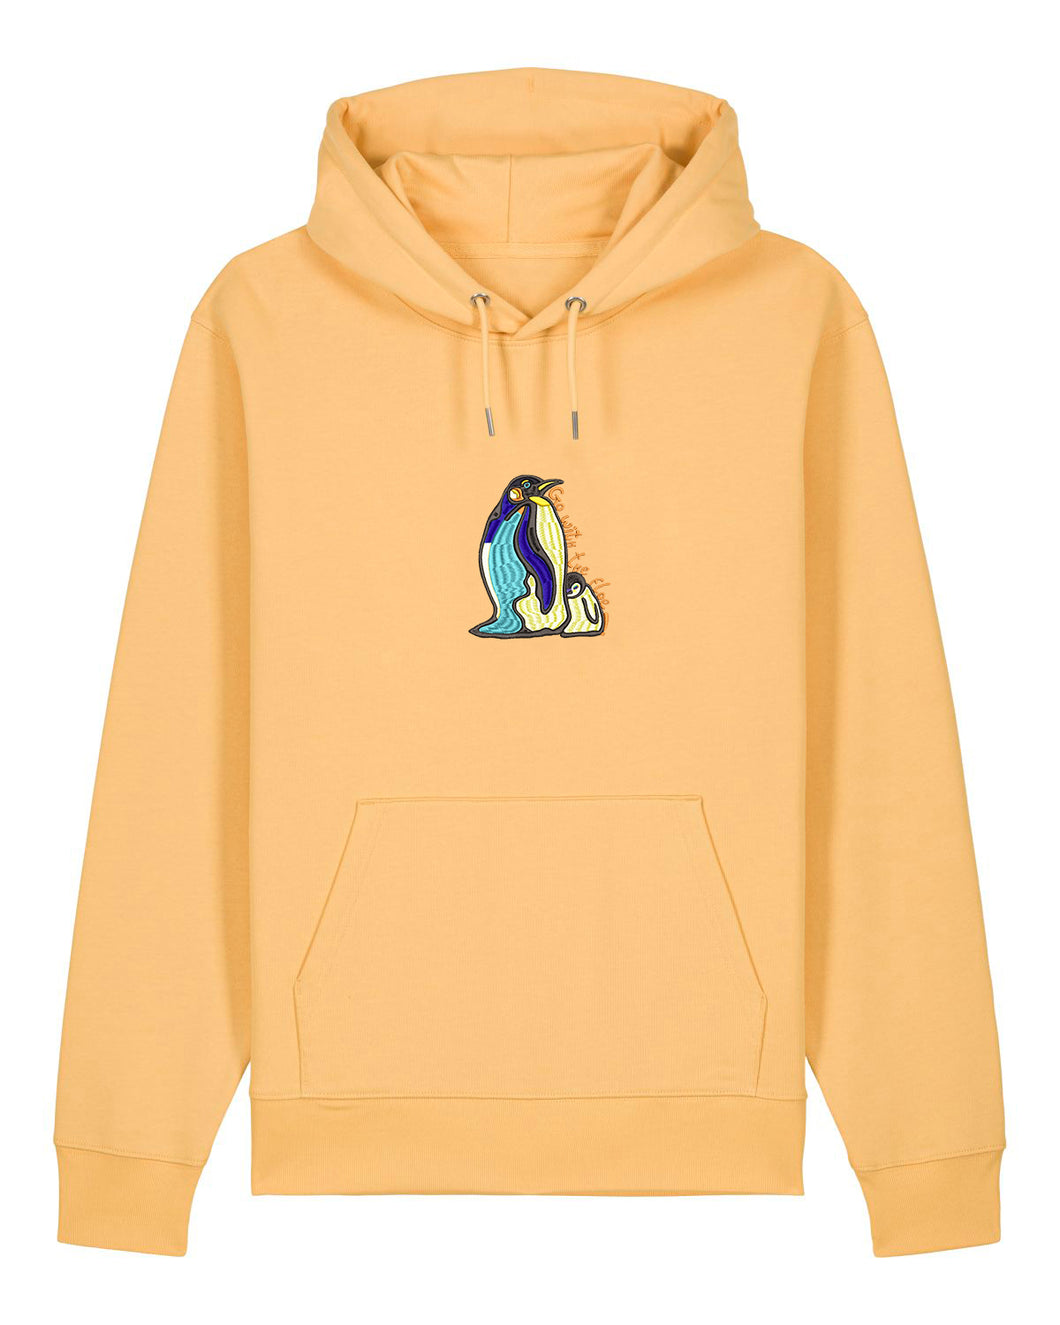 Go with the floe!- Embroidered UNISEX hoodie